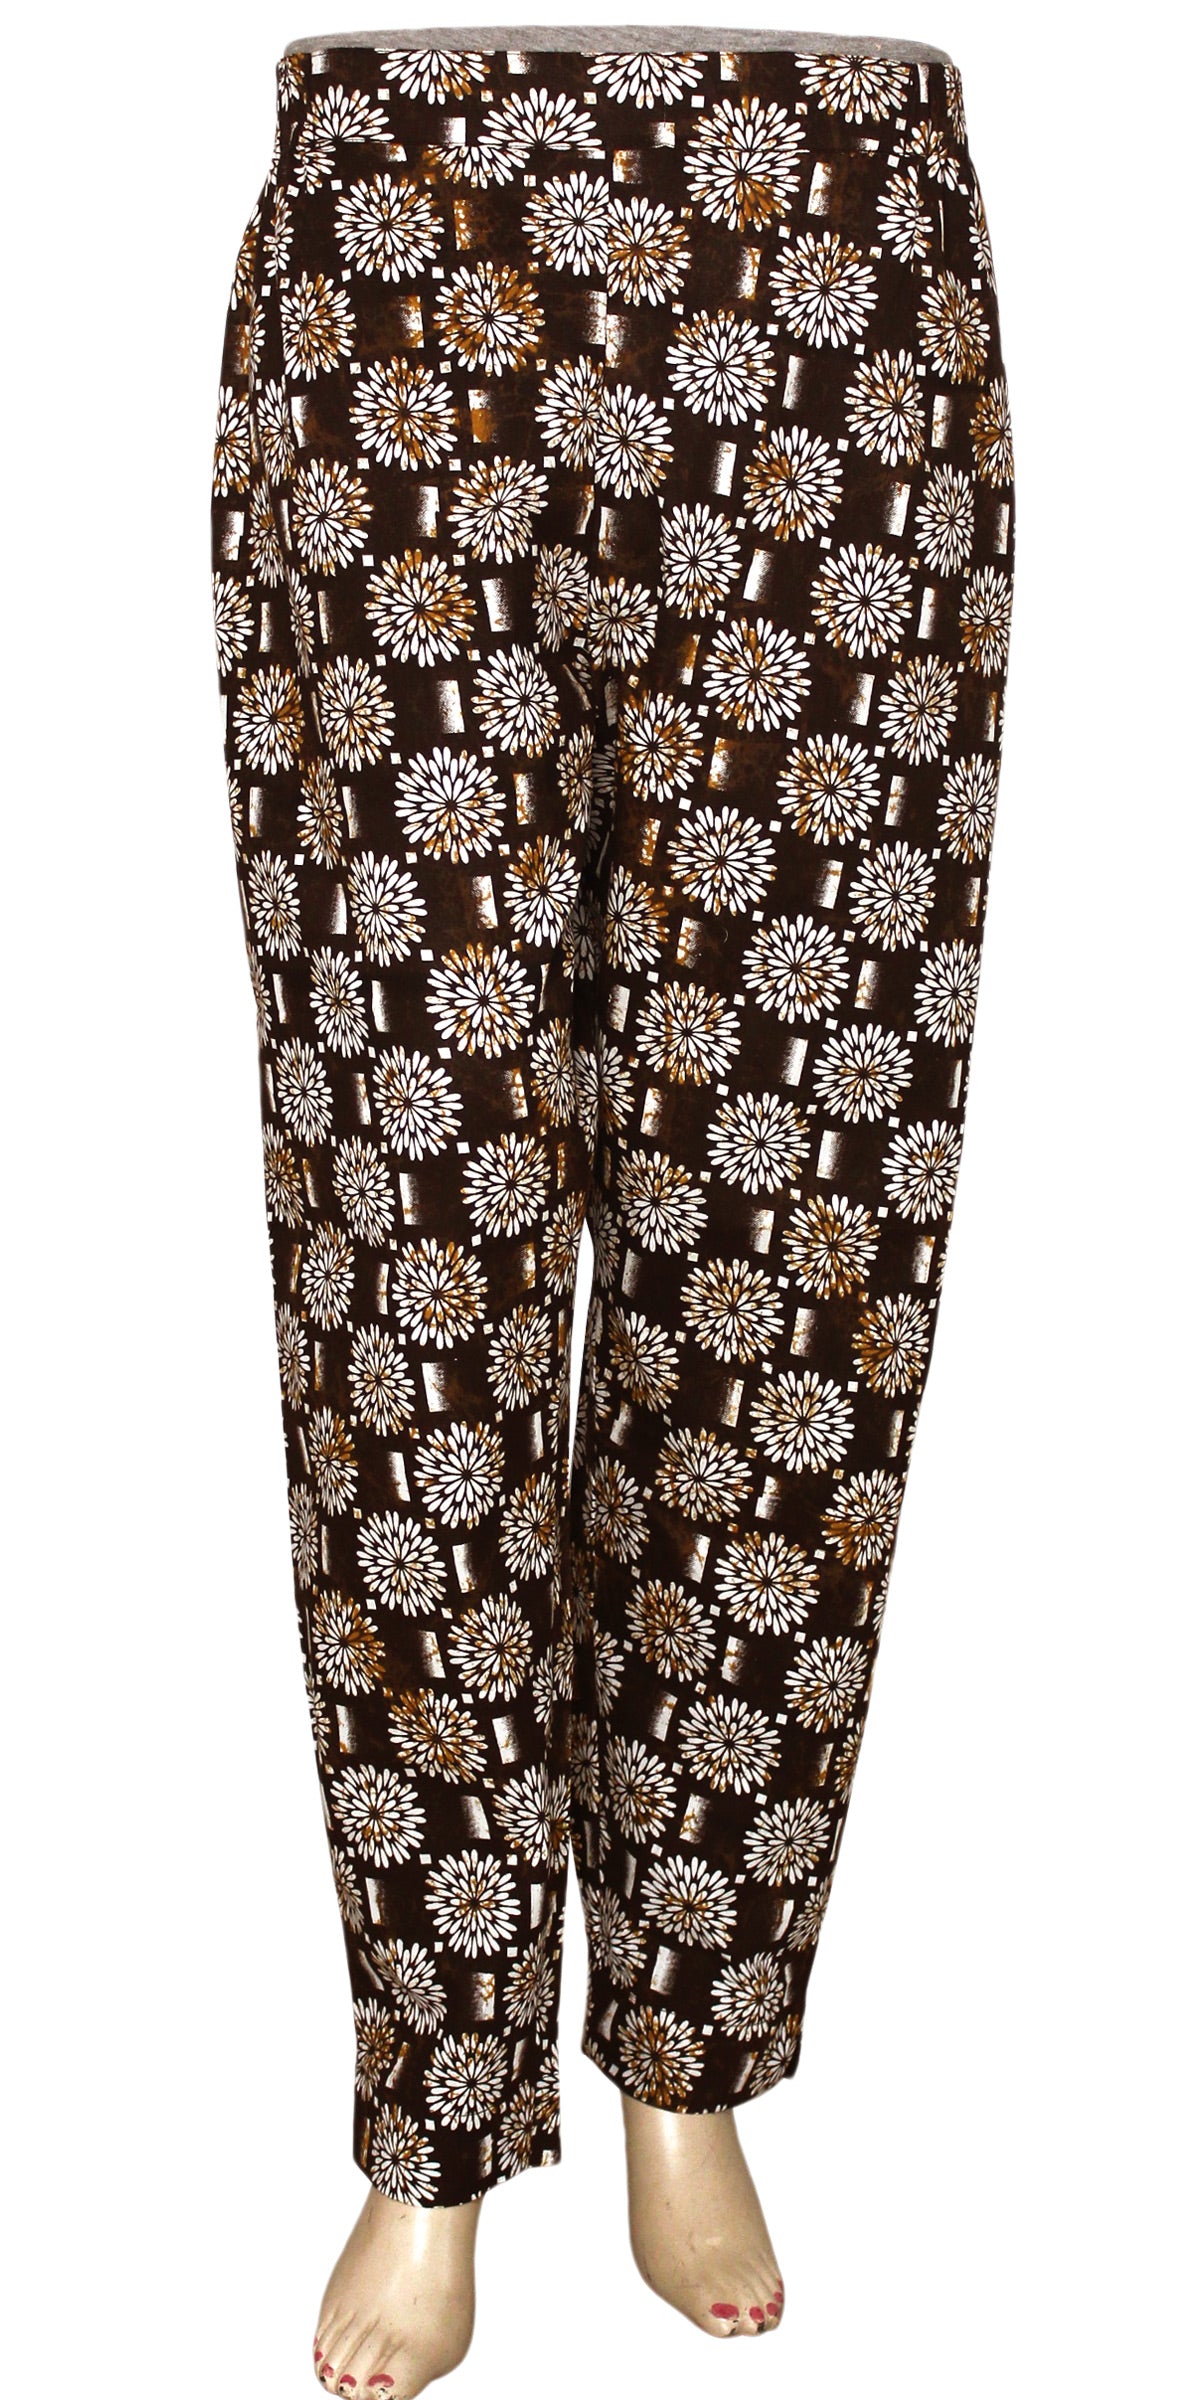 Brown & white Floral Batik Print Cotton Women's Fitted Skinny Pants Trousers